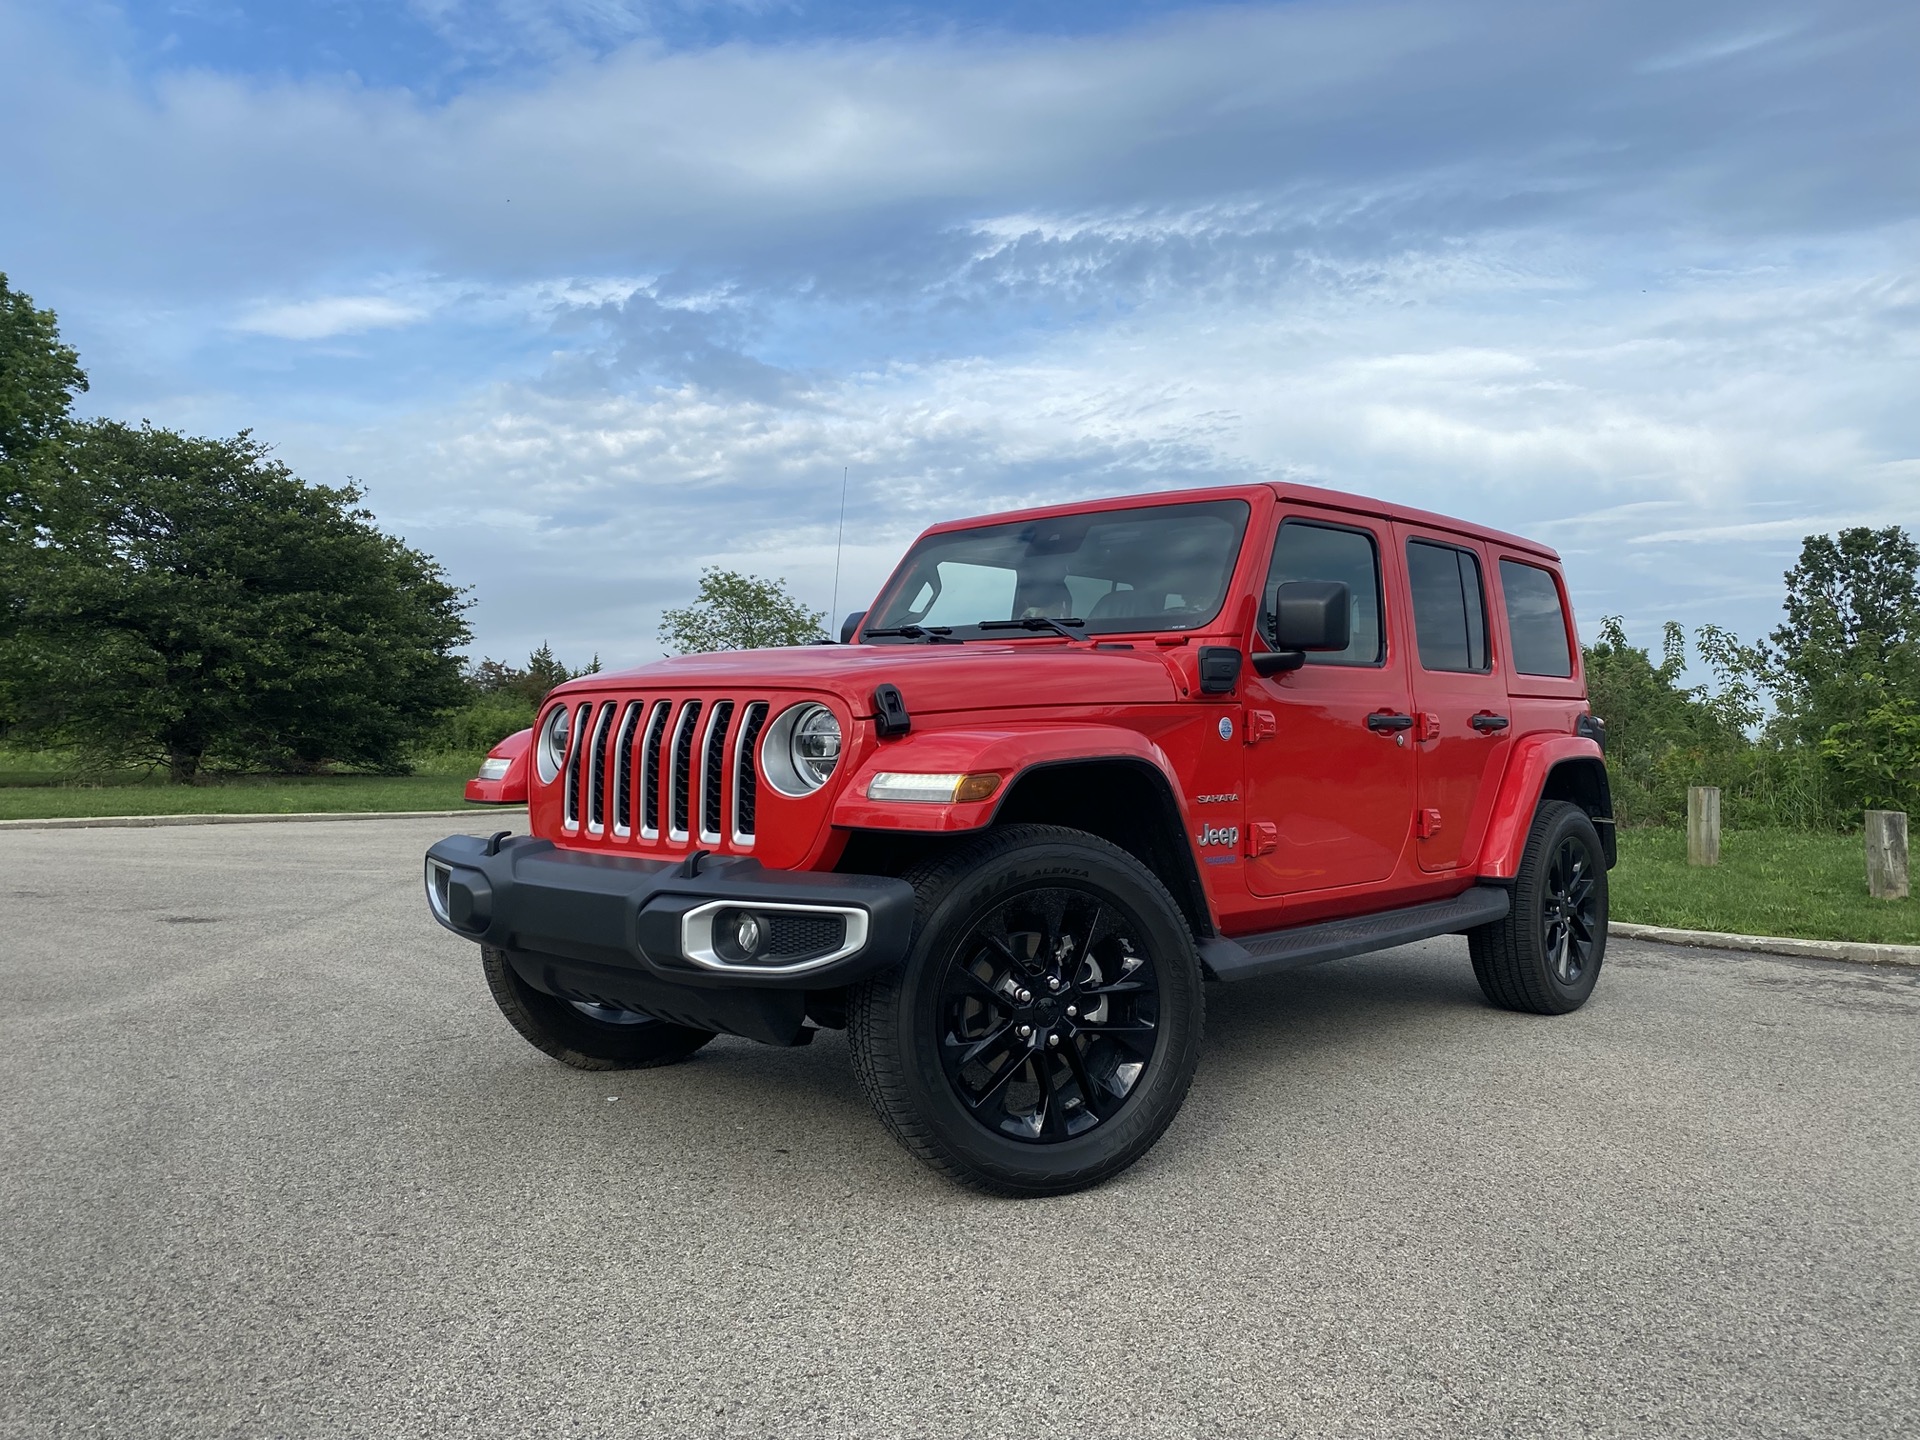 First Drive 21 Jeep Wrangler 4xe Hybrid Plugs Into A Greener Cleaner Great Outdoors